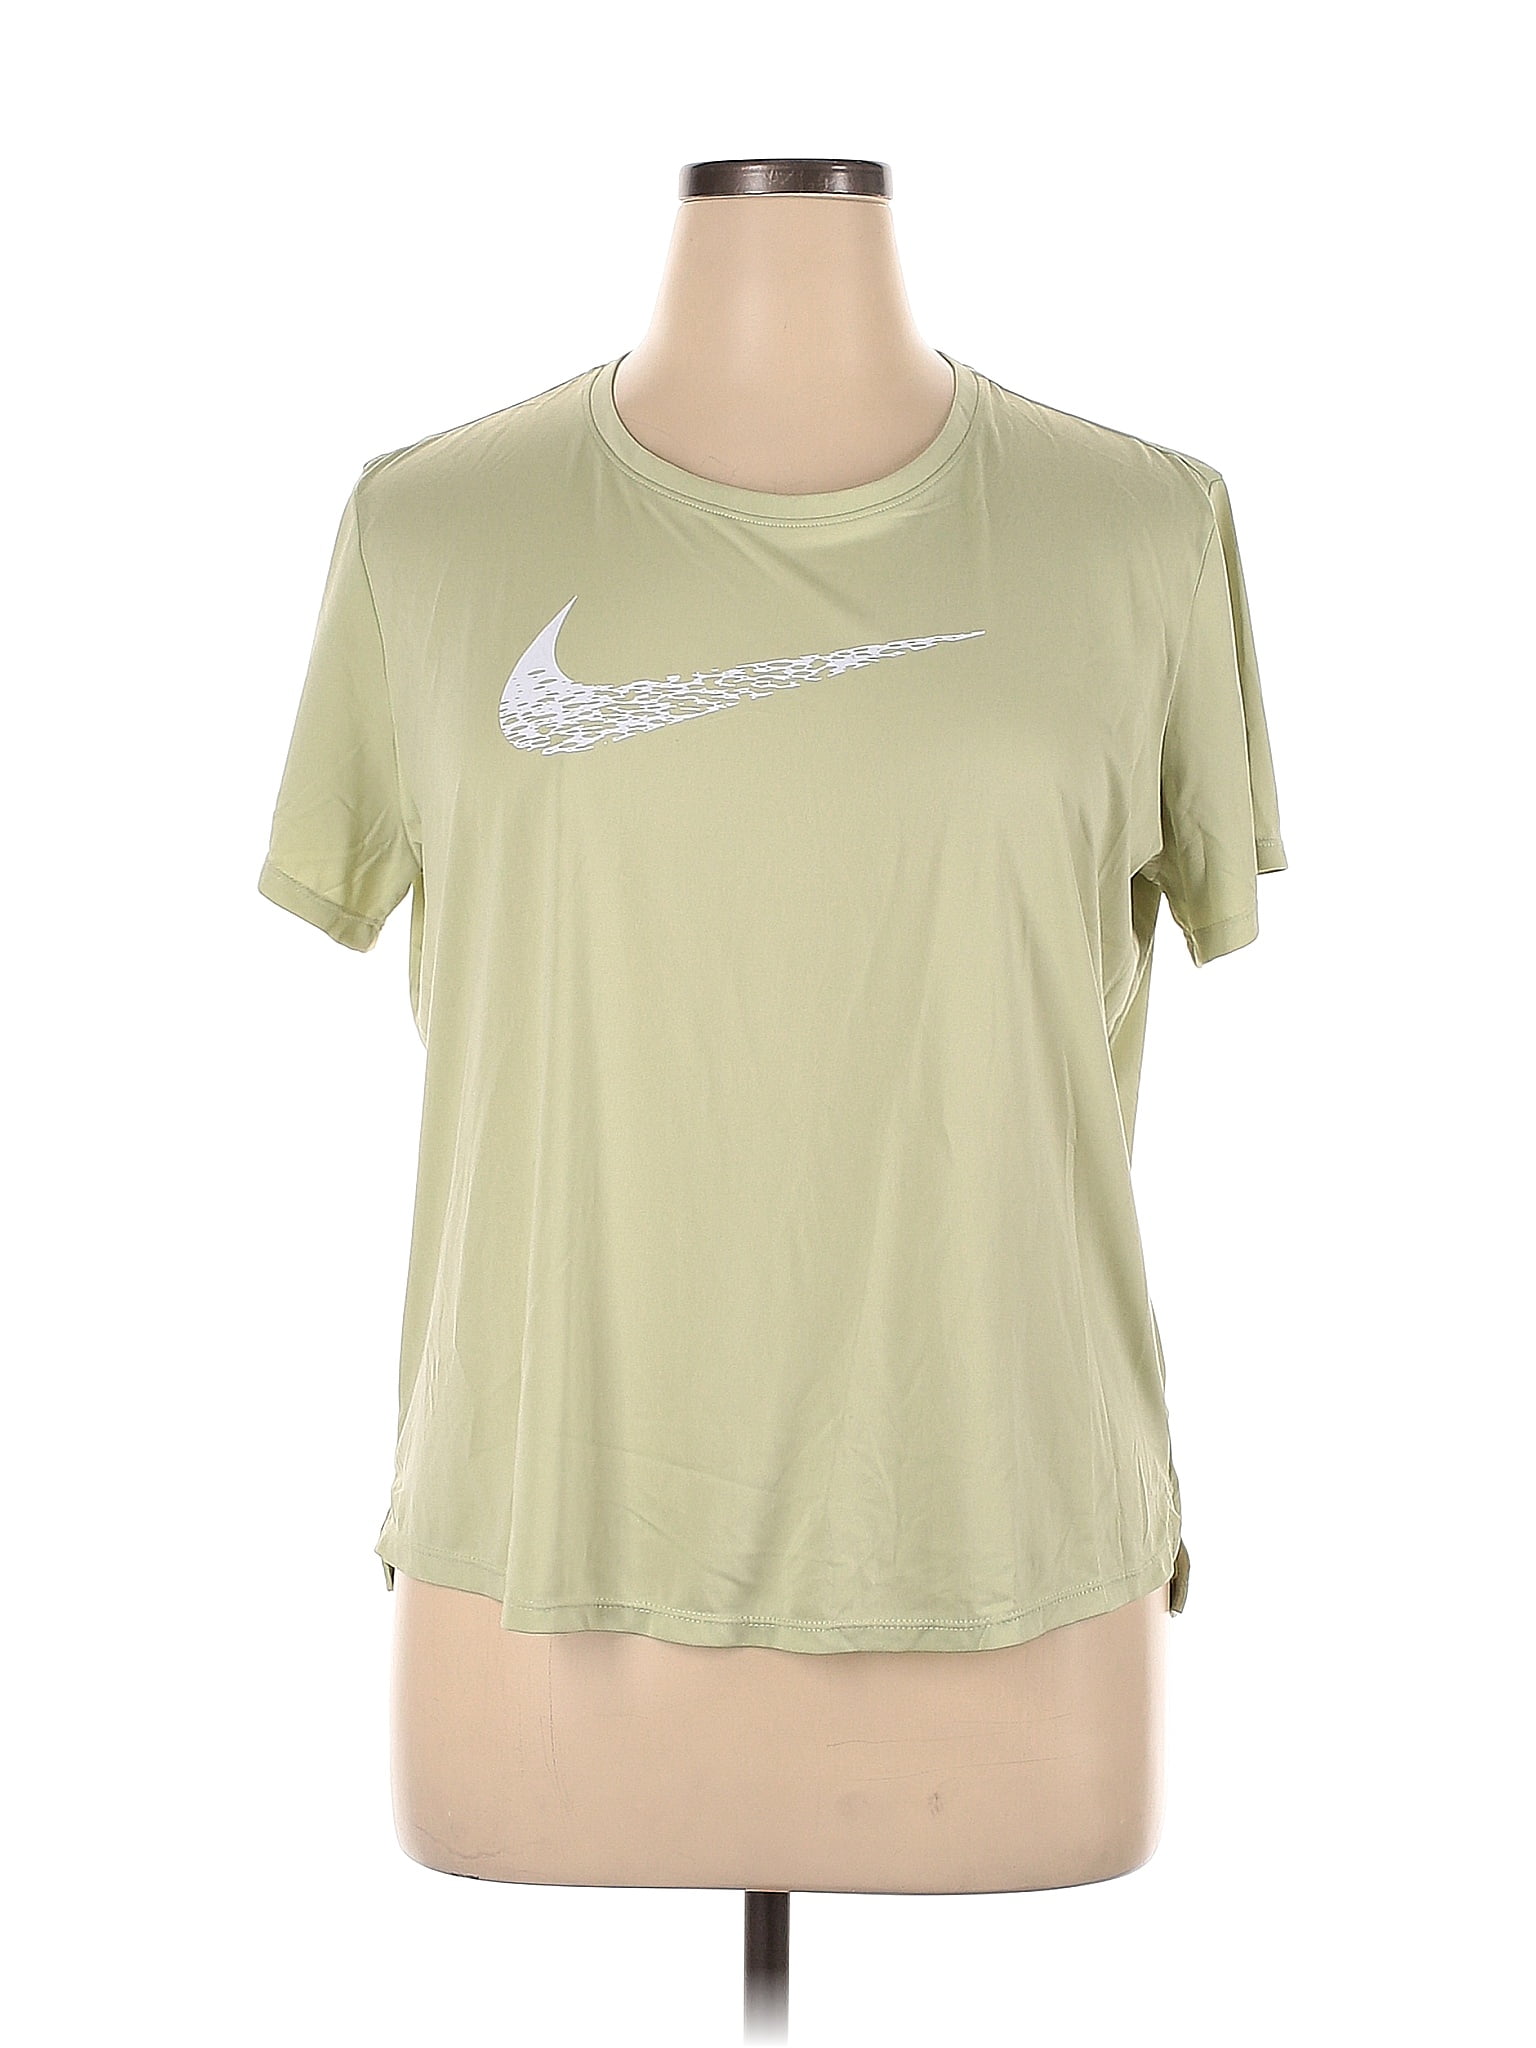 Nike 100% Polyester Solid Green Active T-Shirt Size XL - 46% off